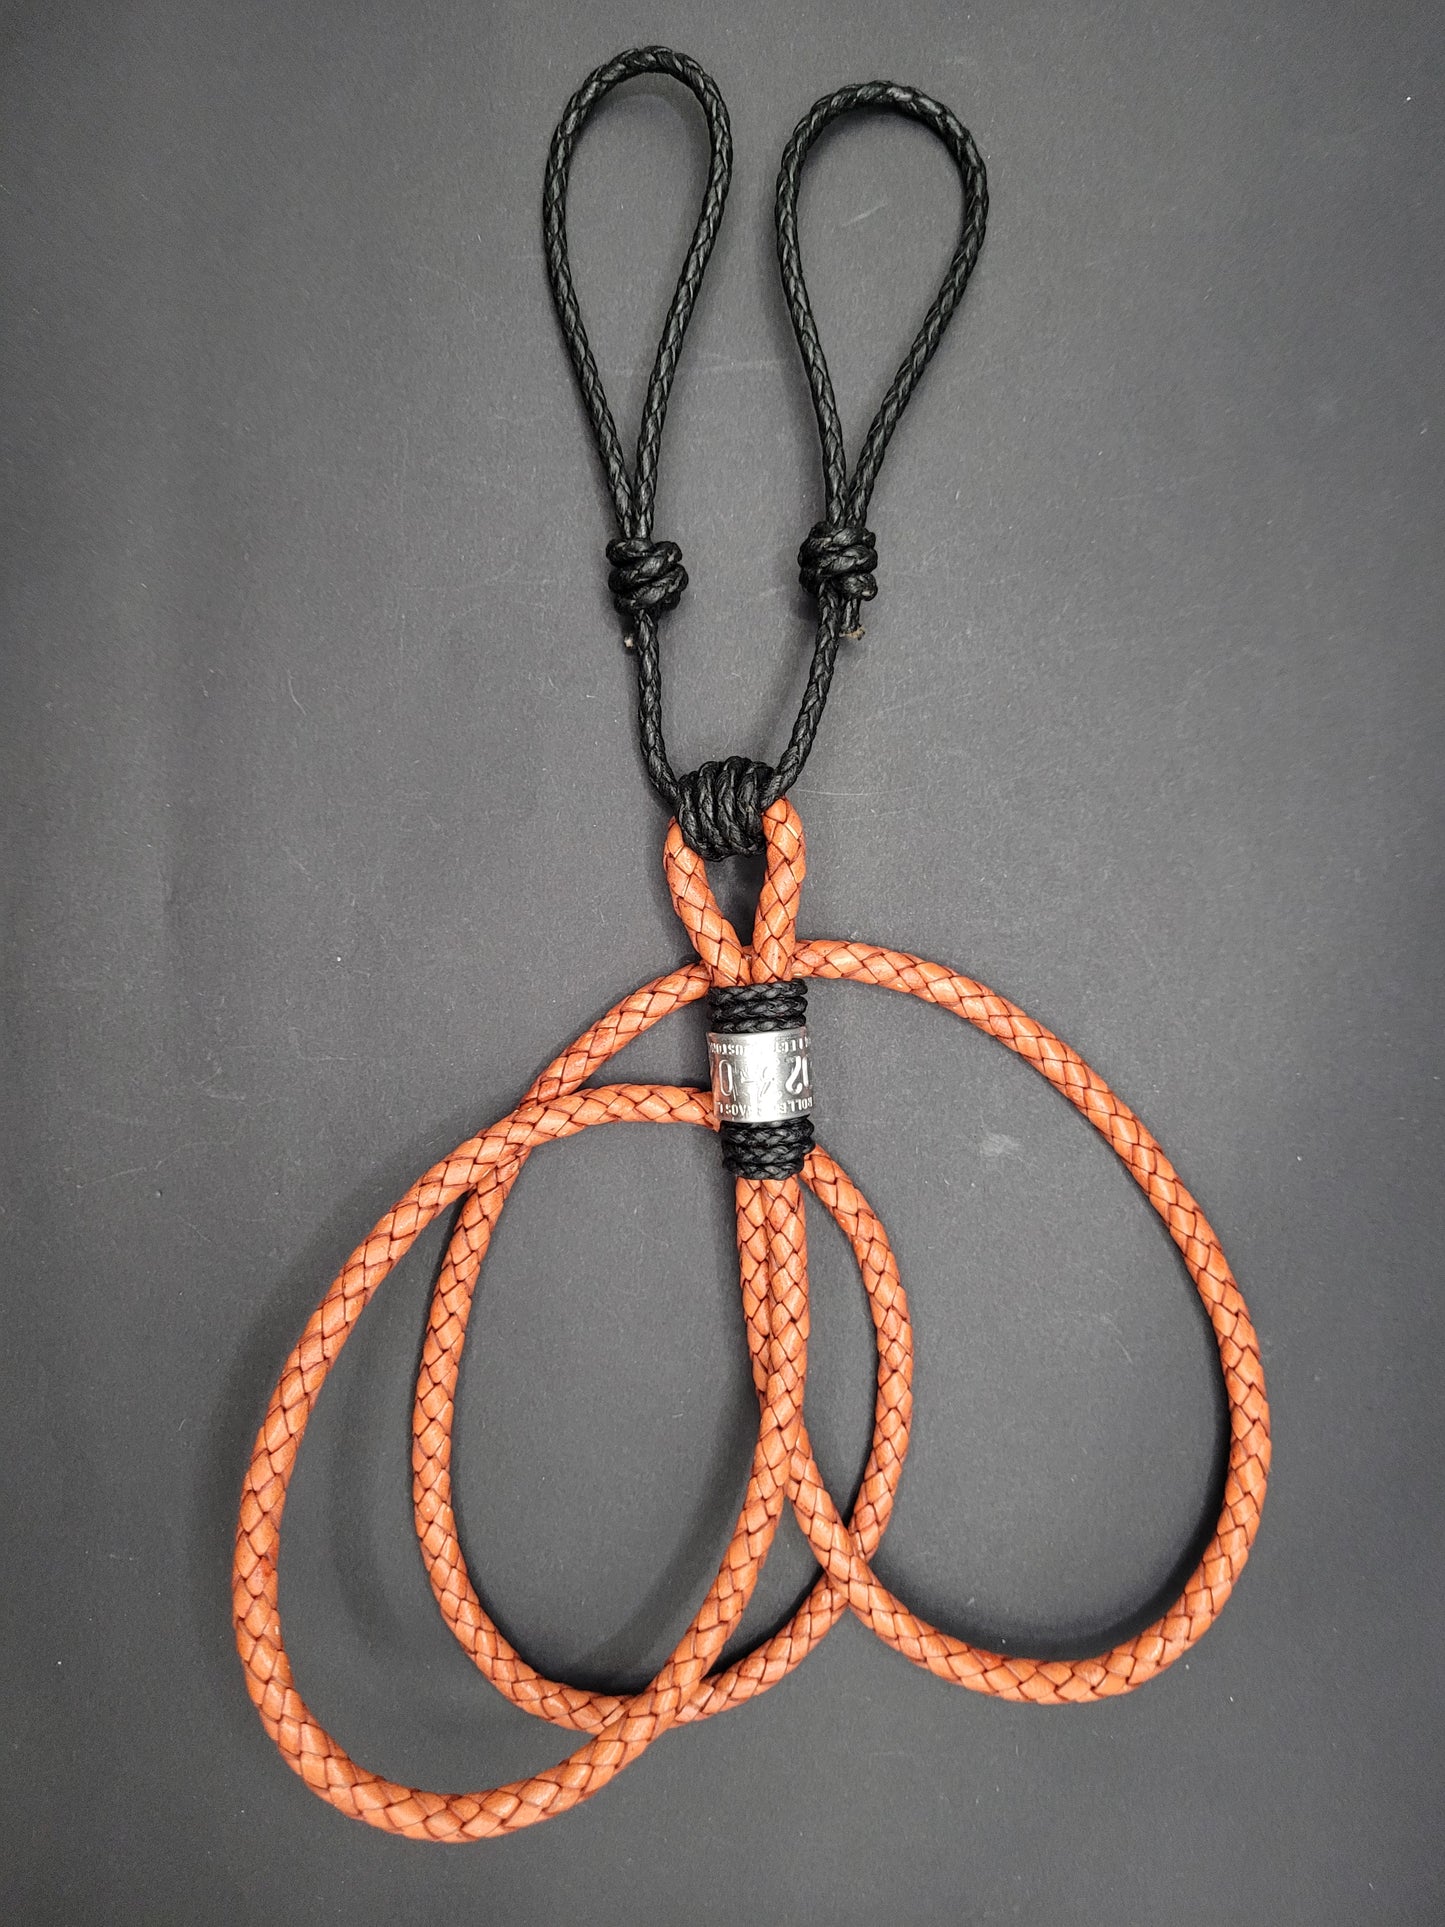 Controlled Chaos Minimalist Lanyards